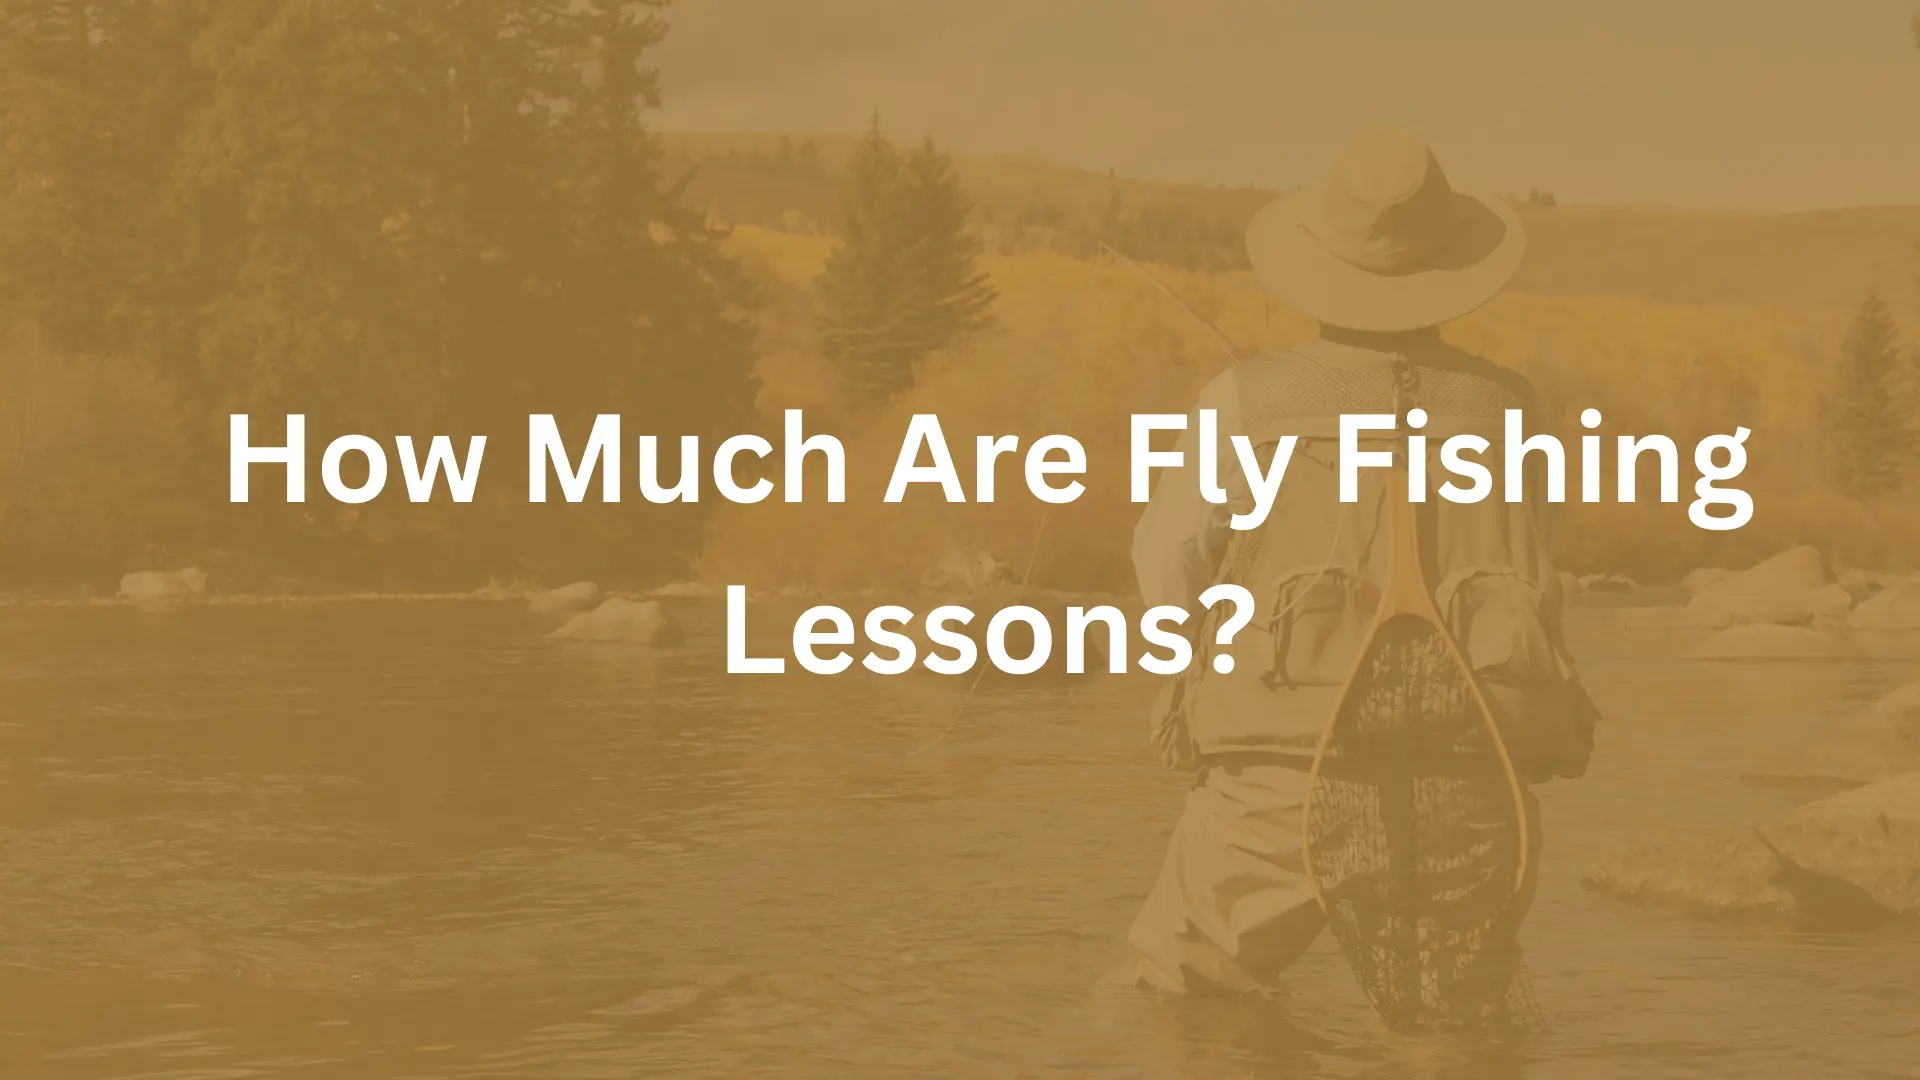 How Much Are Fly Fishing Lessons?